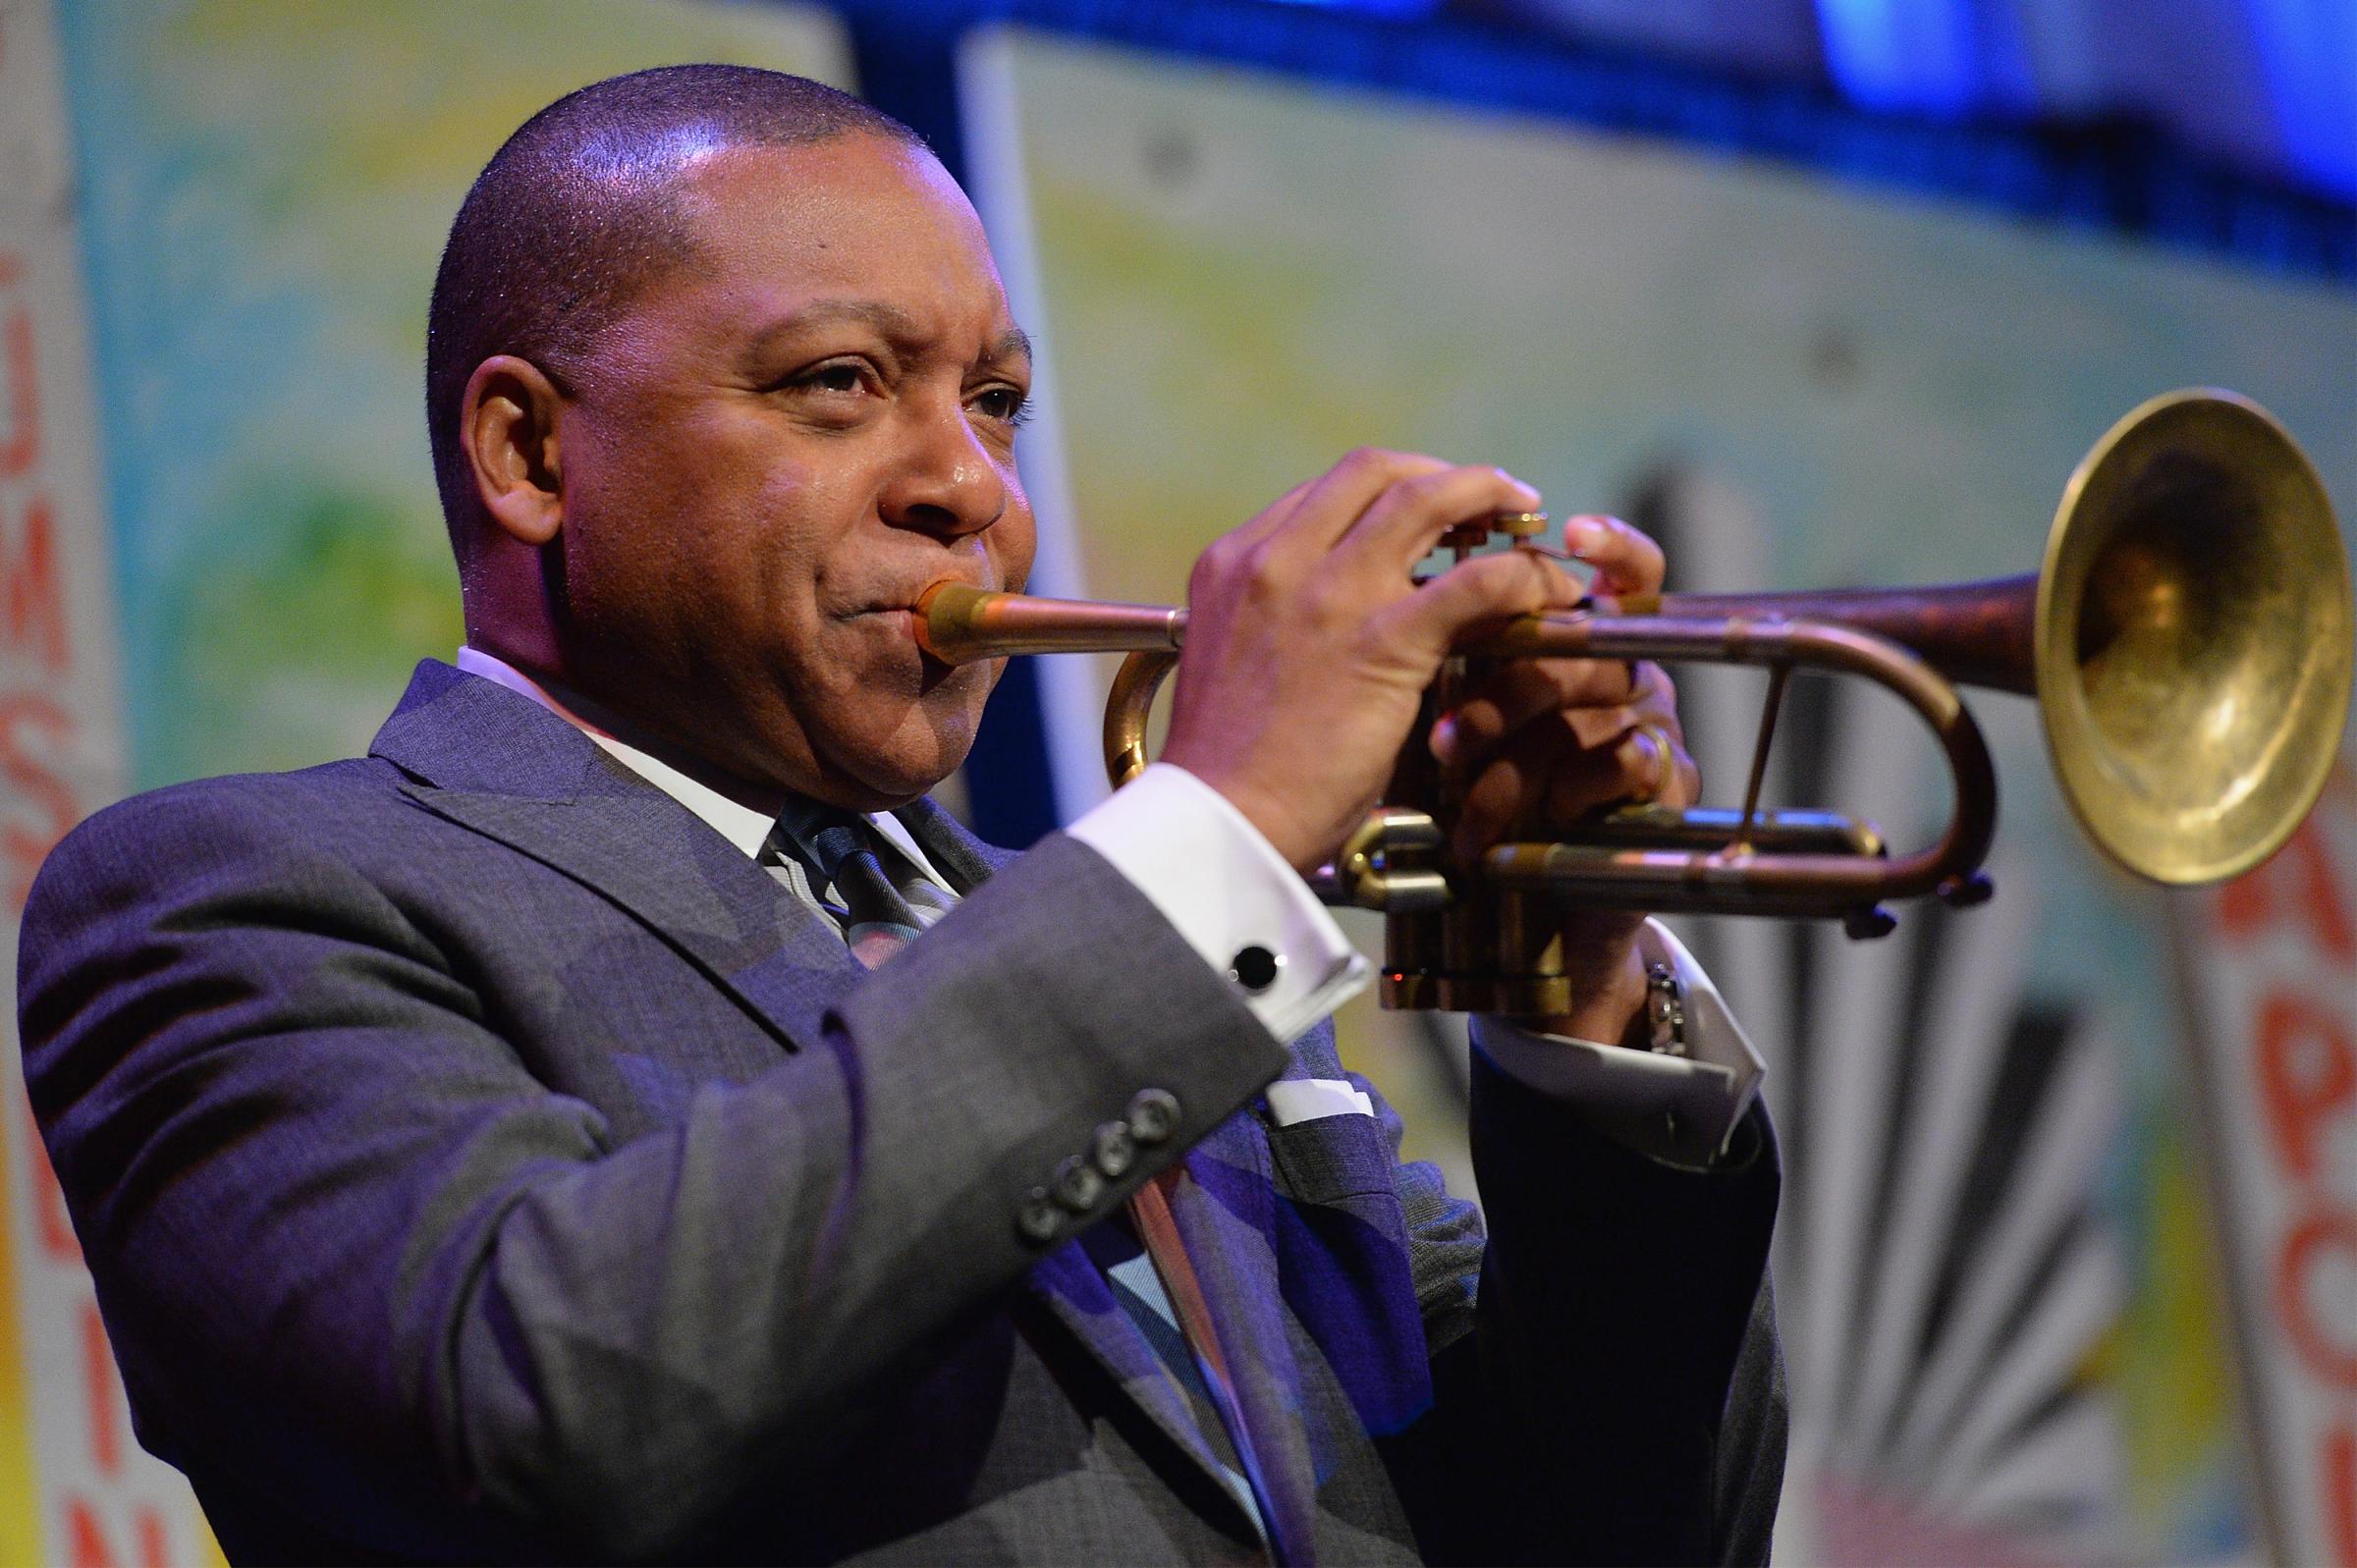 Musician Wynton Marsalis performs onstage during the Northside Center for Child Development 70th Anniversary Spring Gala at Cipriani 42nd Street on April 27, 2016 in New York City.